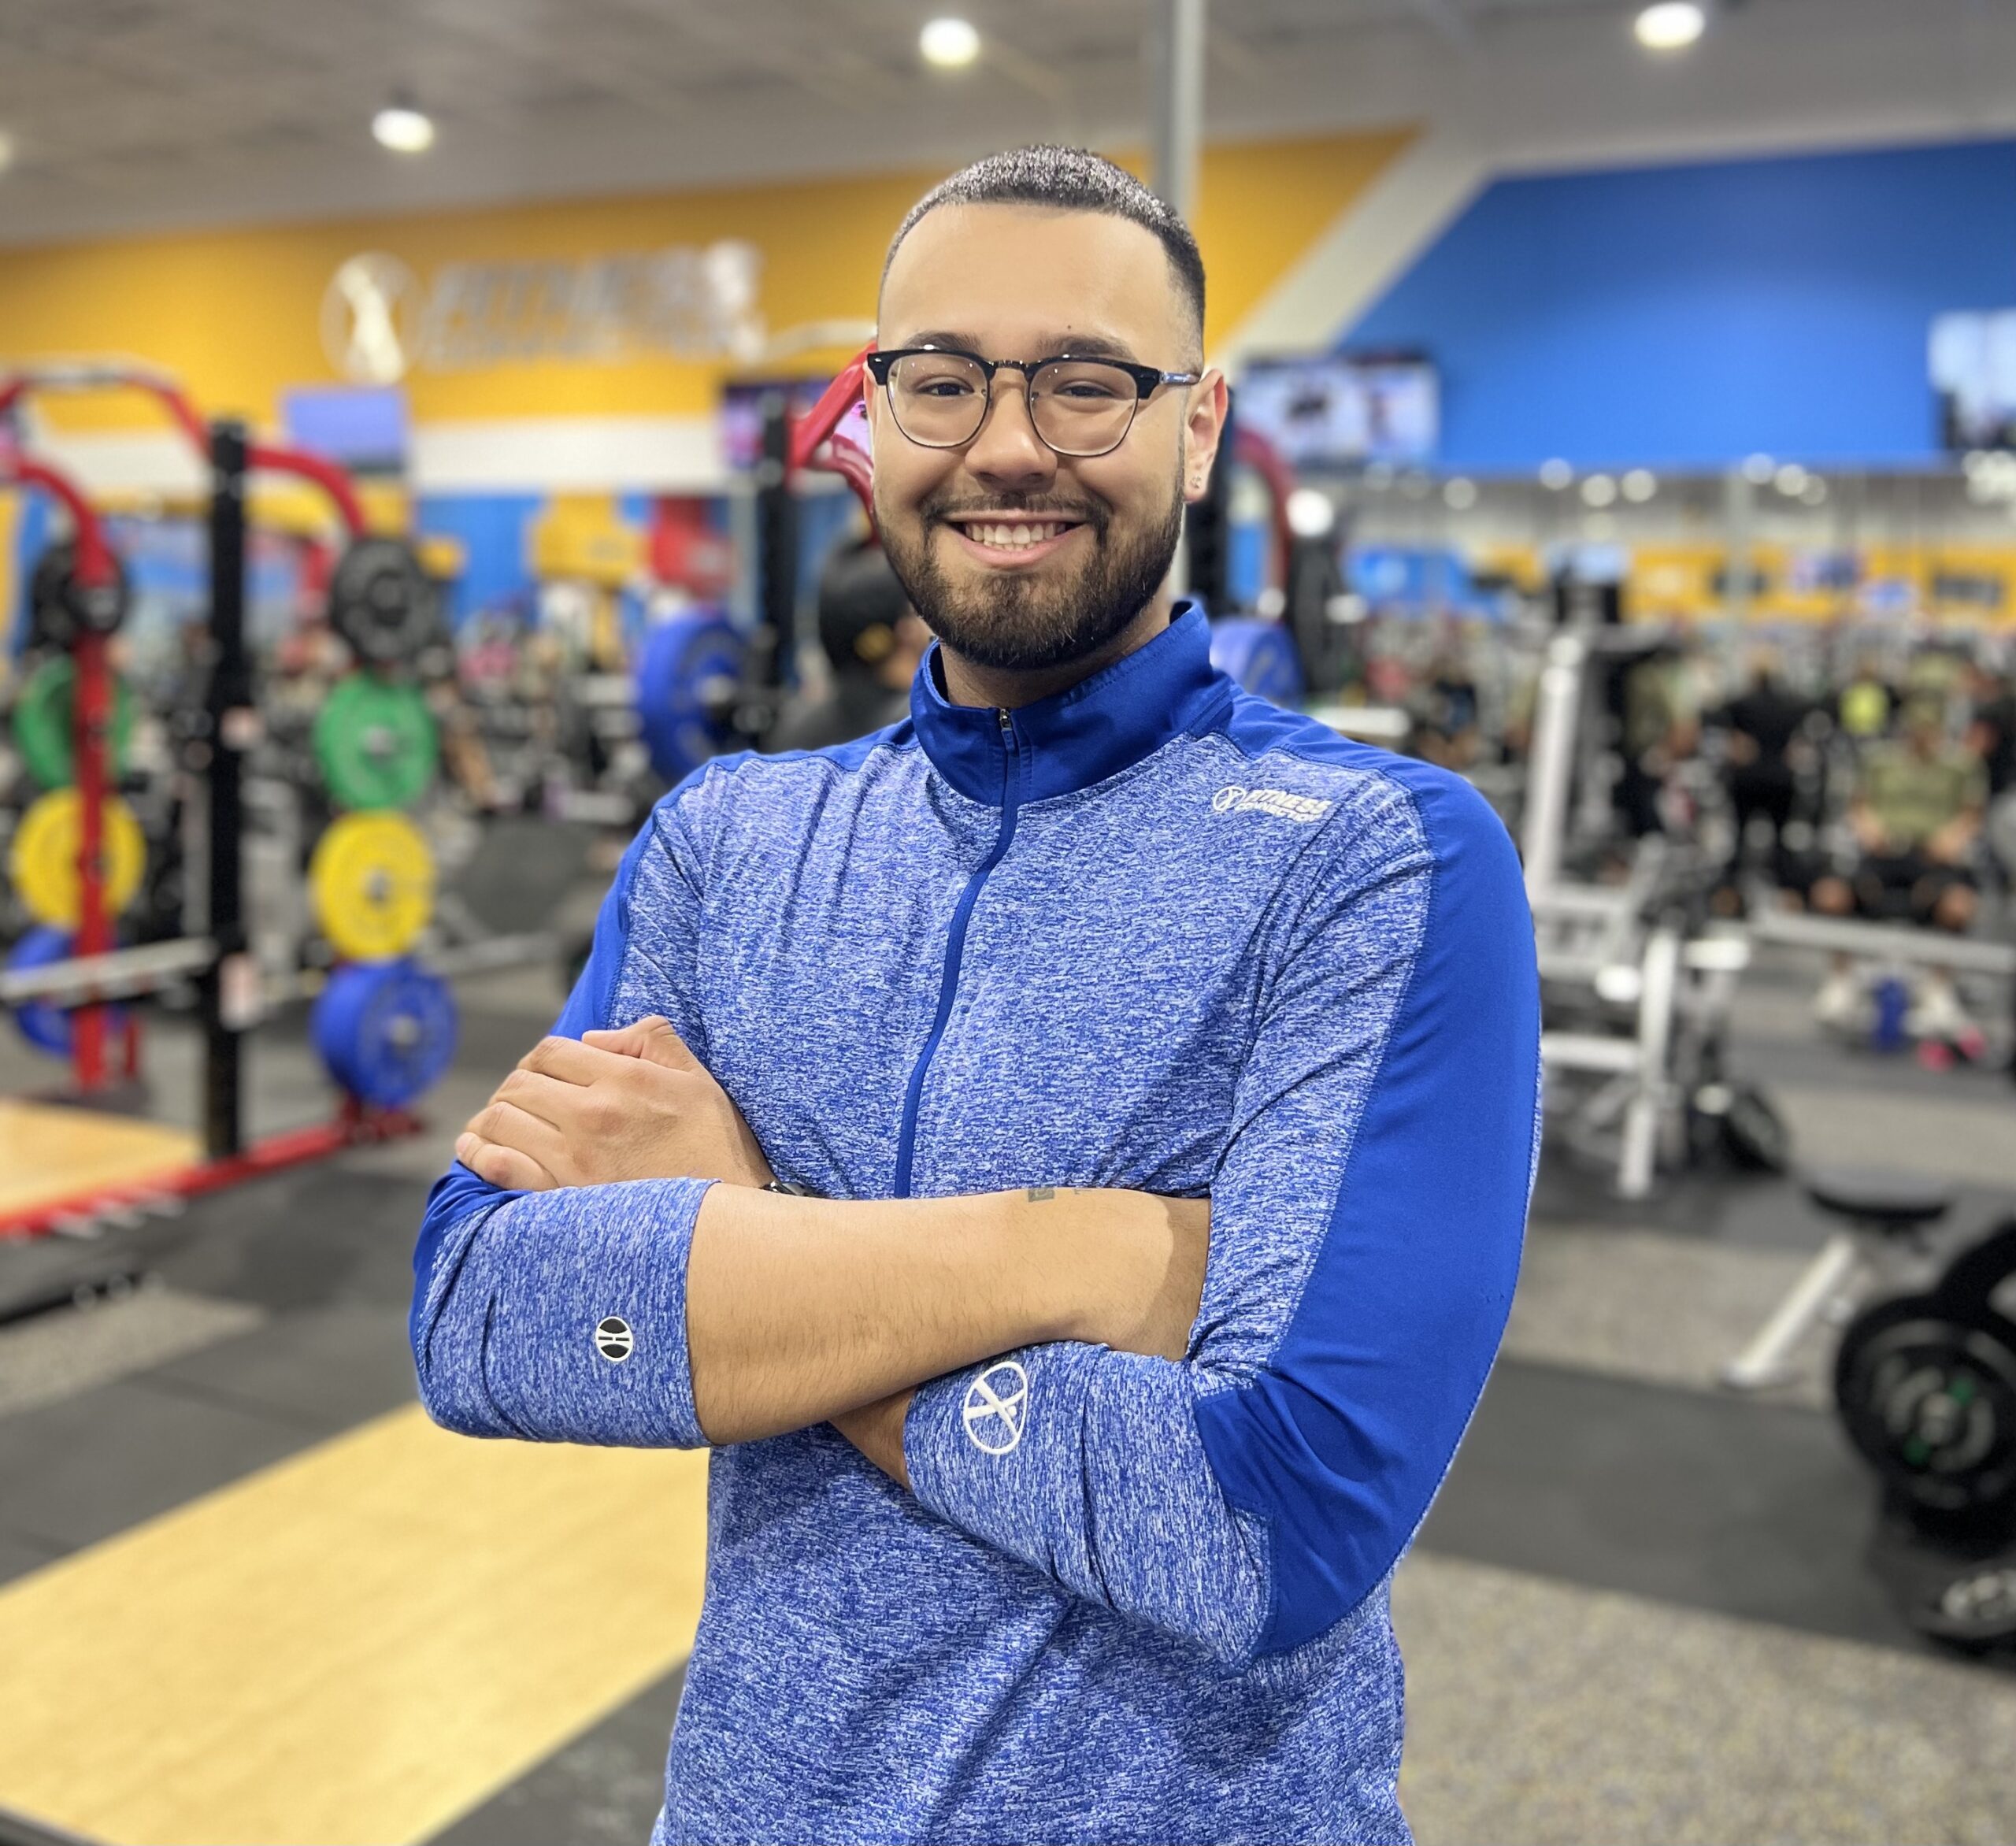 Jose H. - Club Manager of Fitness Connection standing in front of fitness equipment